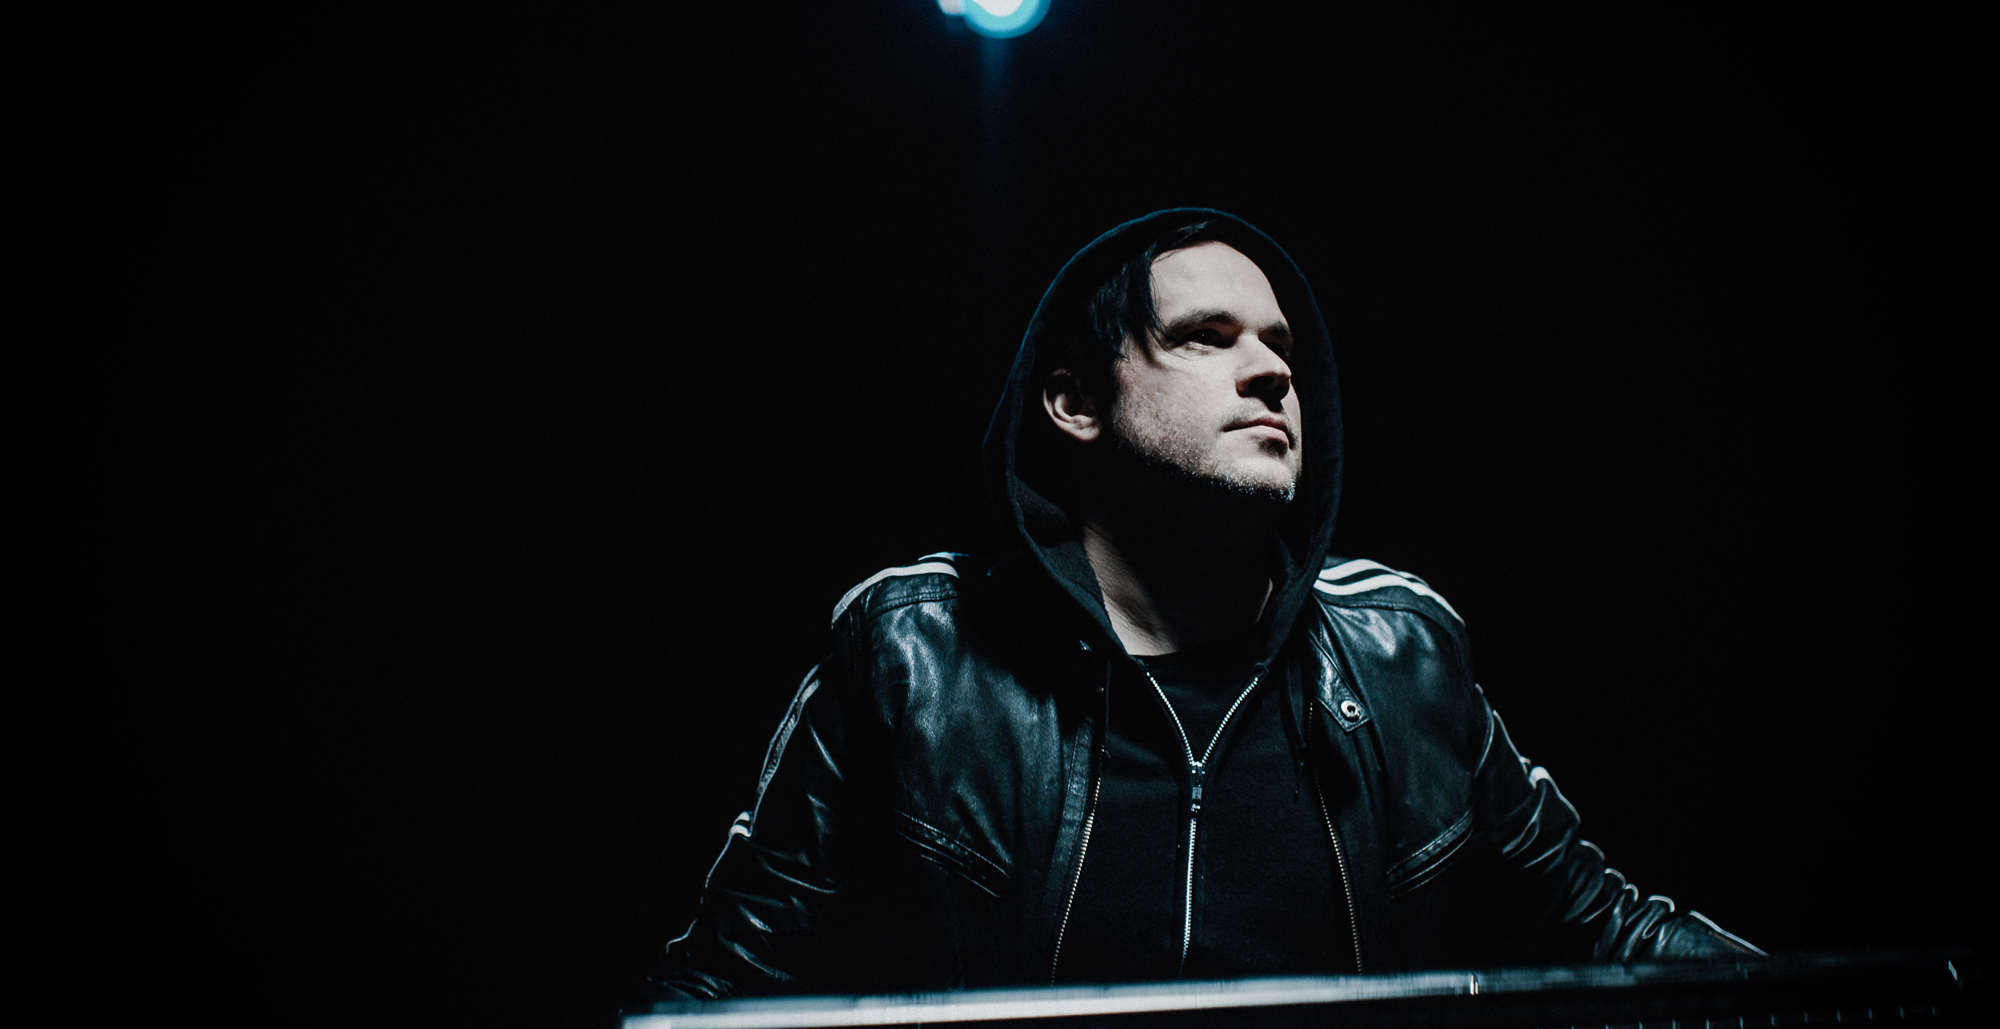 Man holds a keyboard with black leather jacket and hood in a black room lit by overhead light.